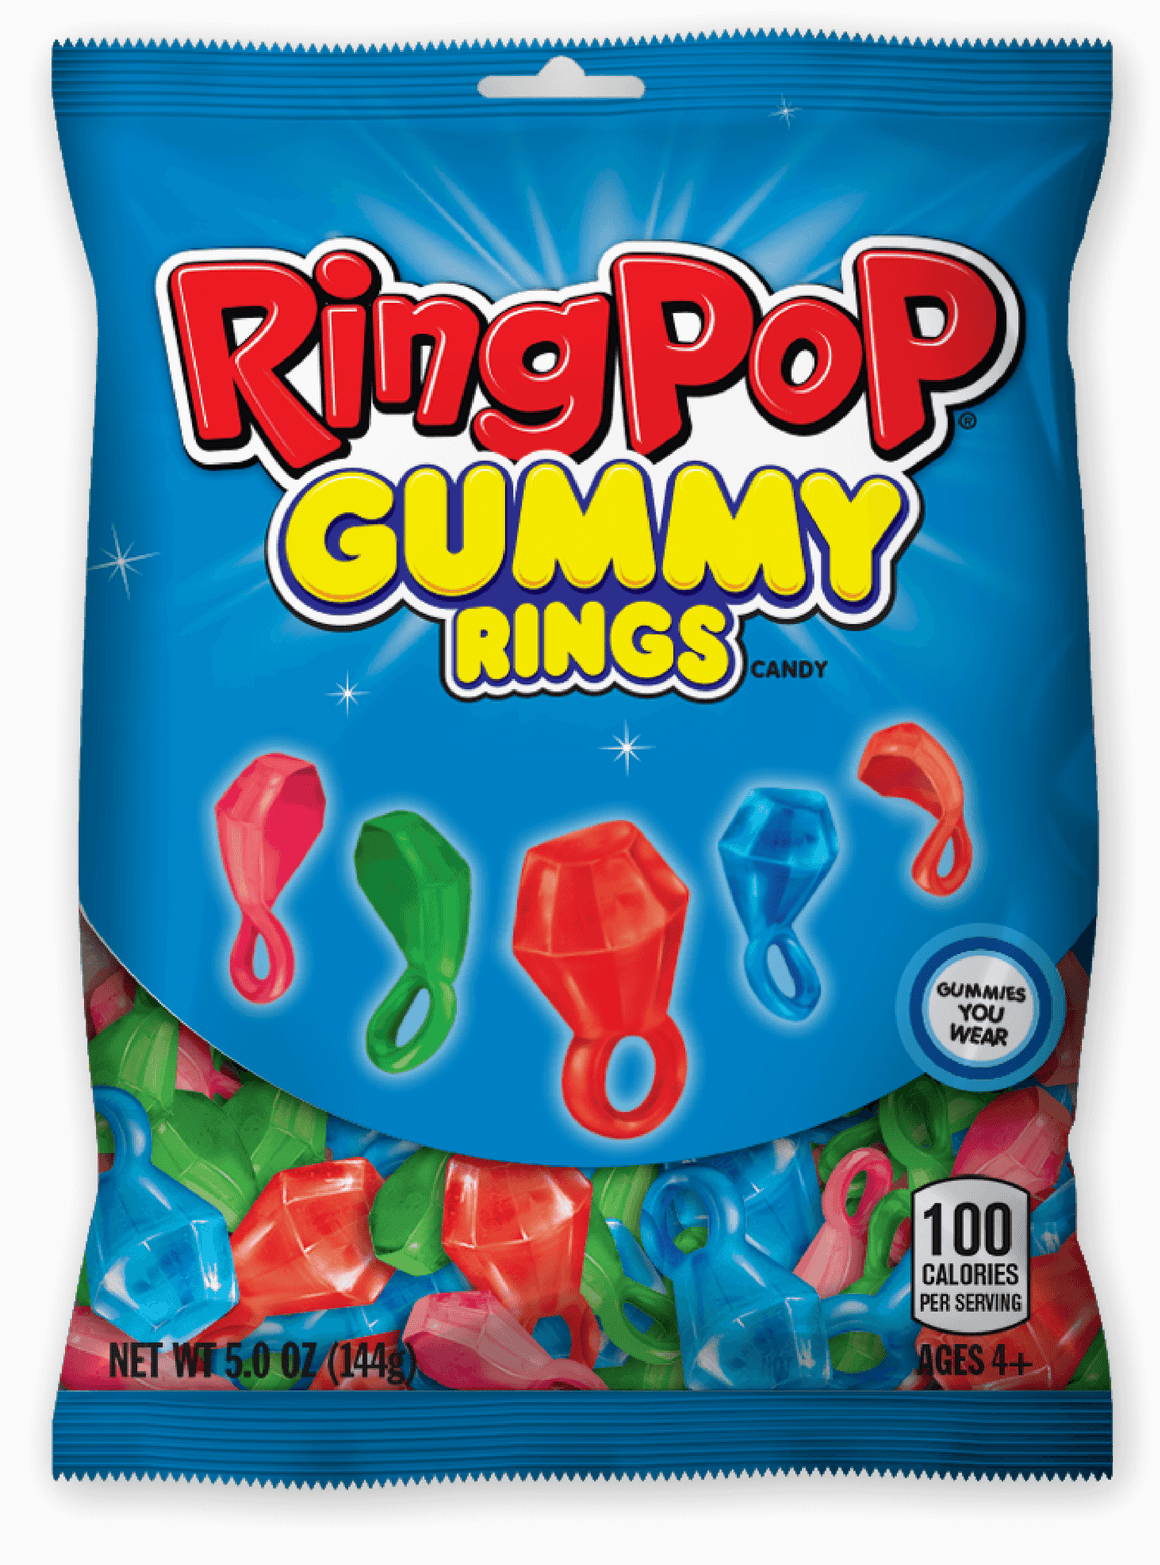 Ring Pop Gummy Rings Candy 5 oz. Bag. For fresh candy and great service, visit www.allcitycandy.com